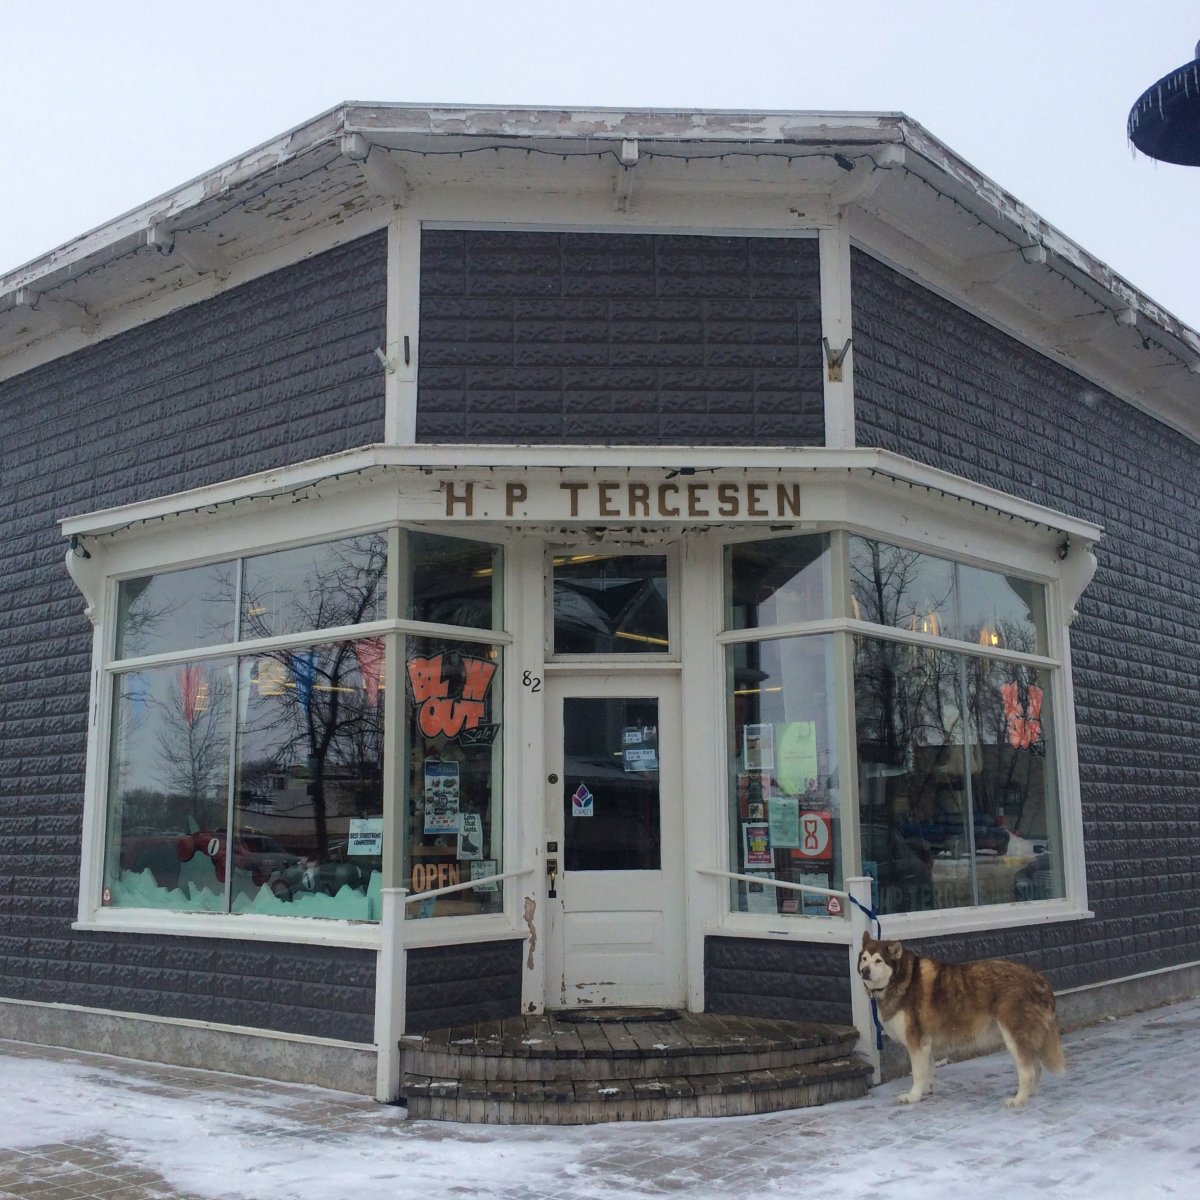 H.P. Tergesen & Sons in Gimli, Manitoba, was broken into on Friday. The owner used social media to help find the alleged thief. 